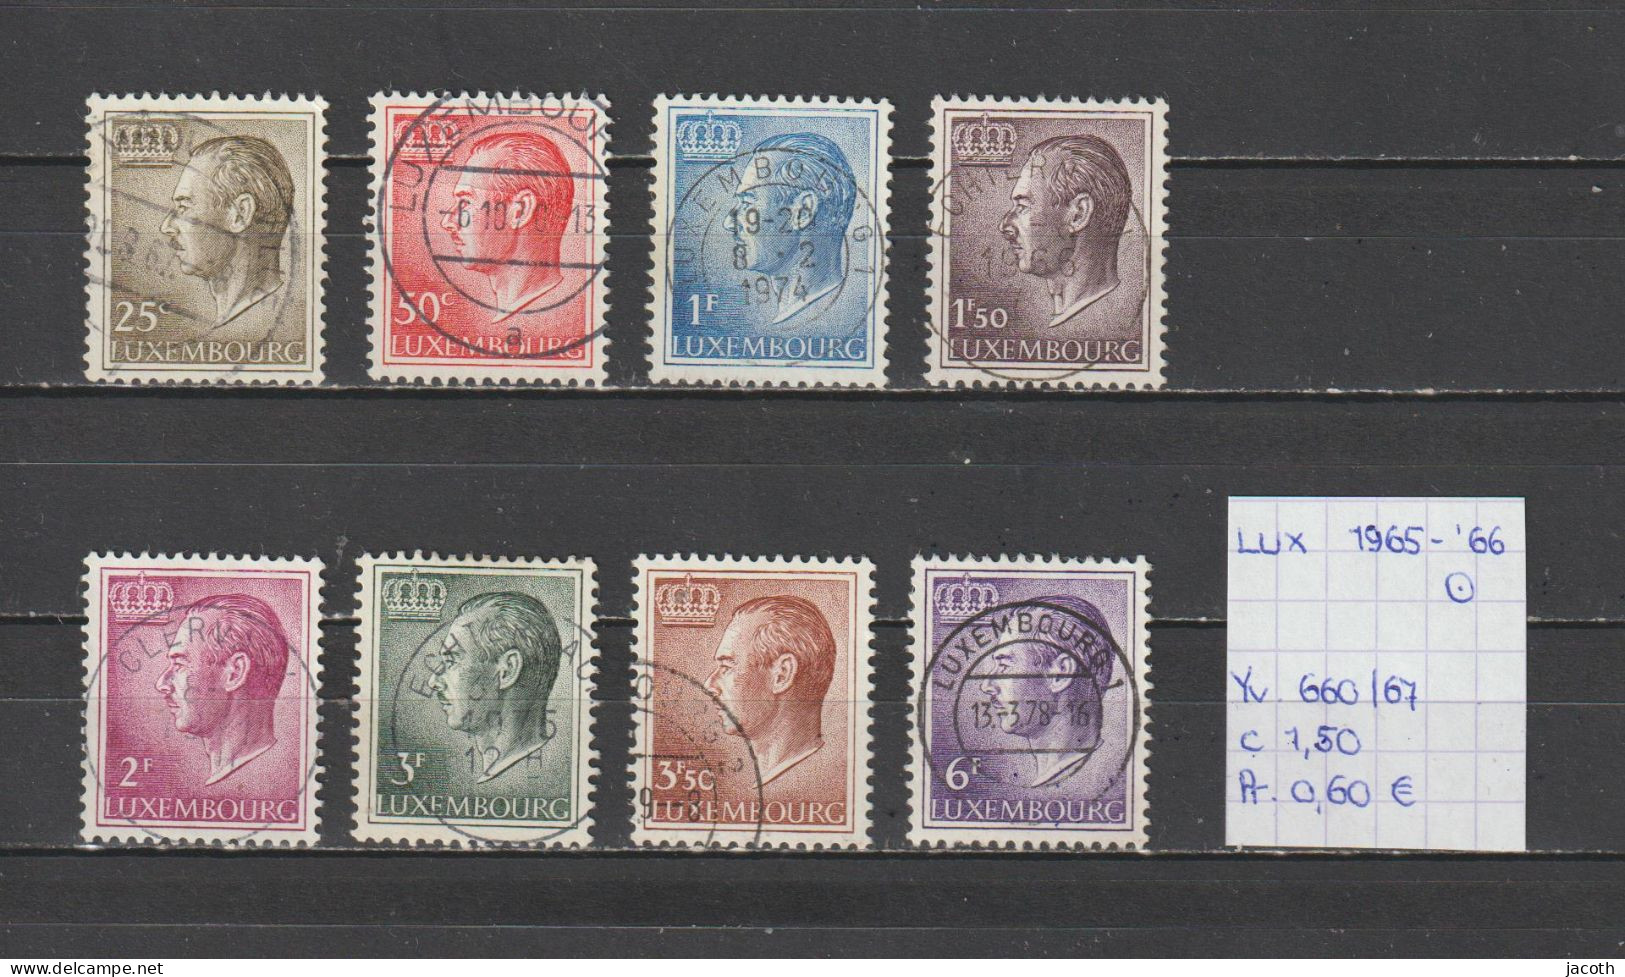 (TJ) Luxembourg 1965-'66 - YT 660/67 (gest./obl./used) - Used Stamps